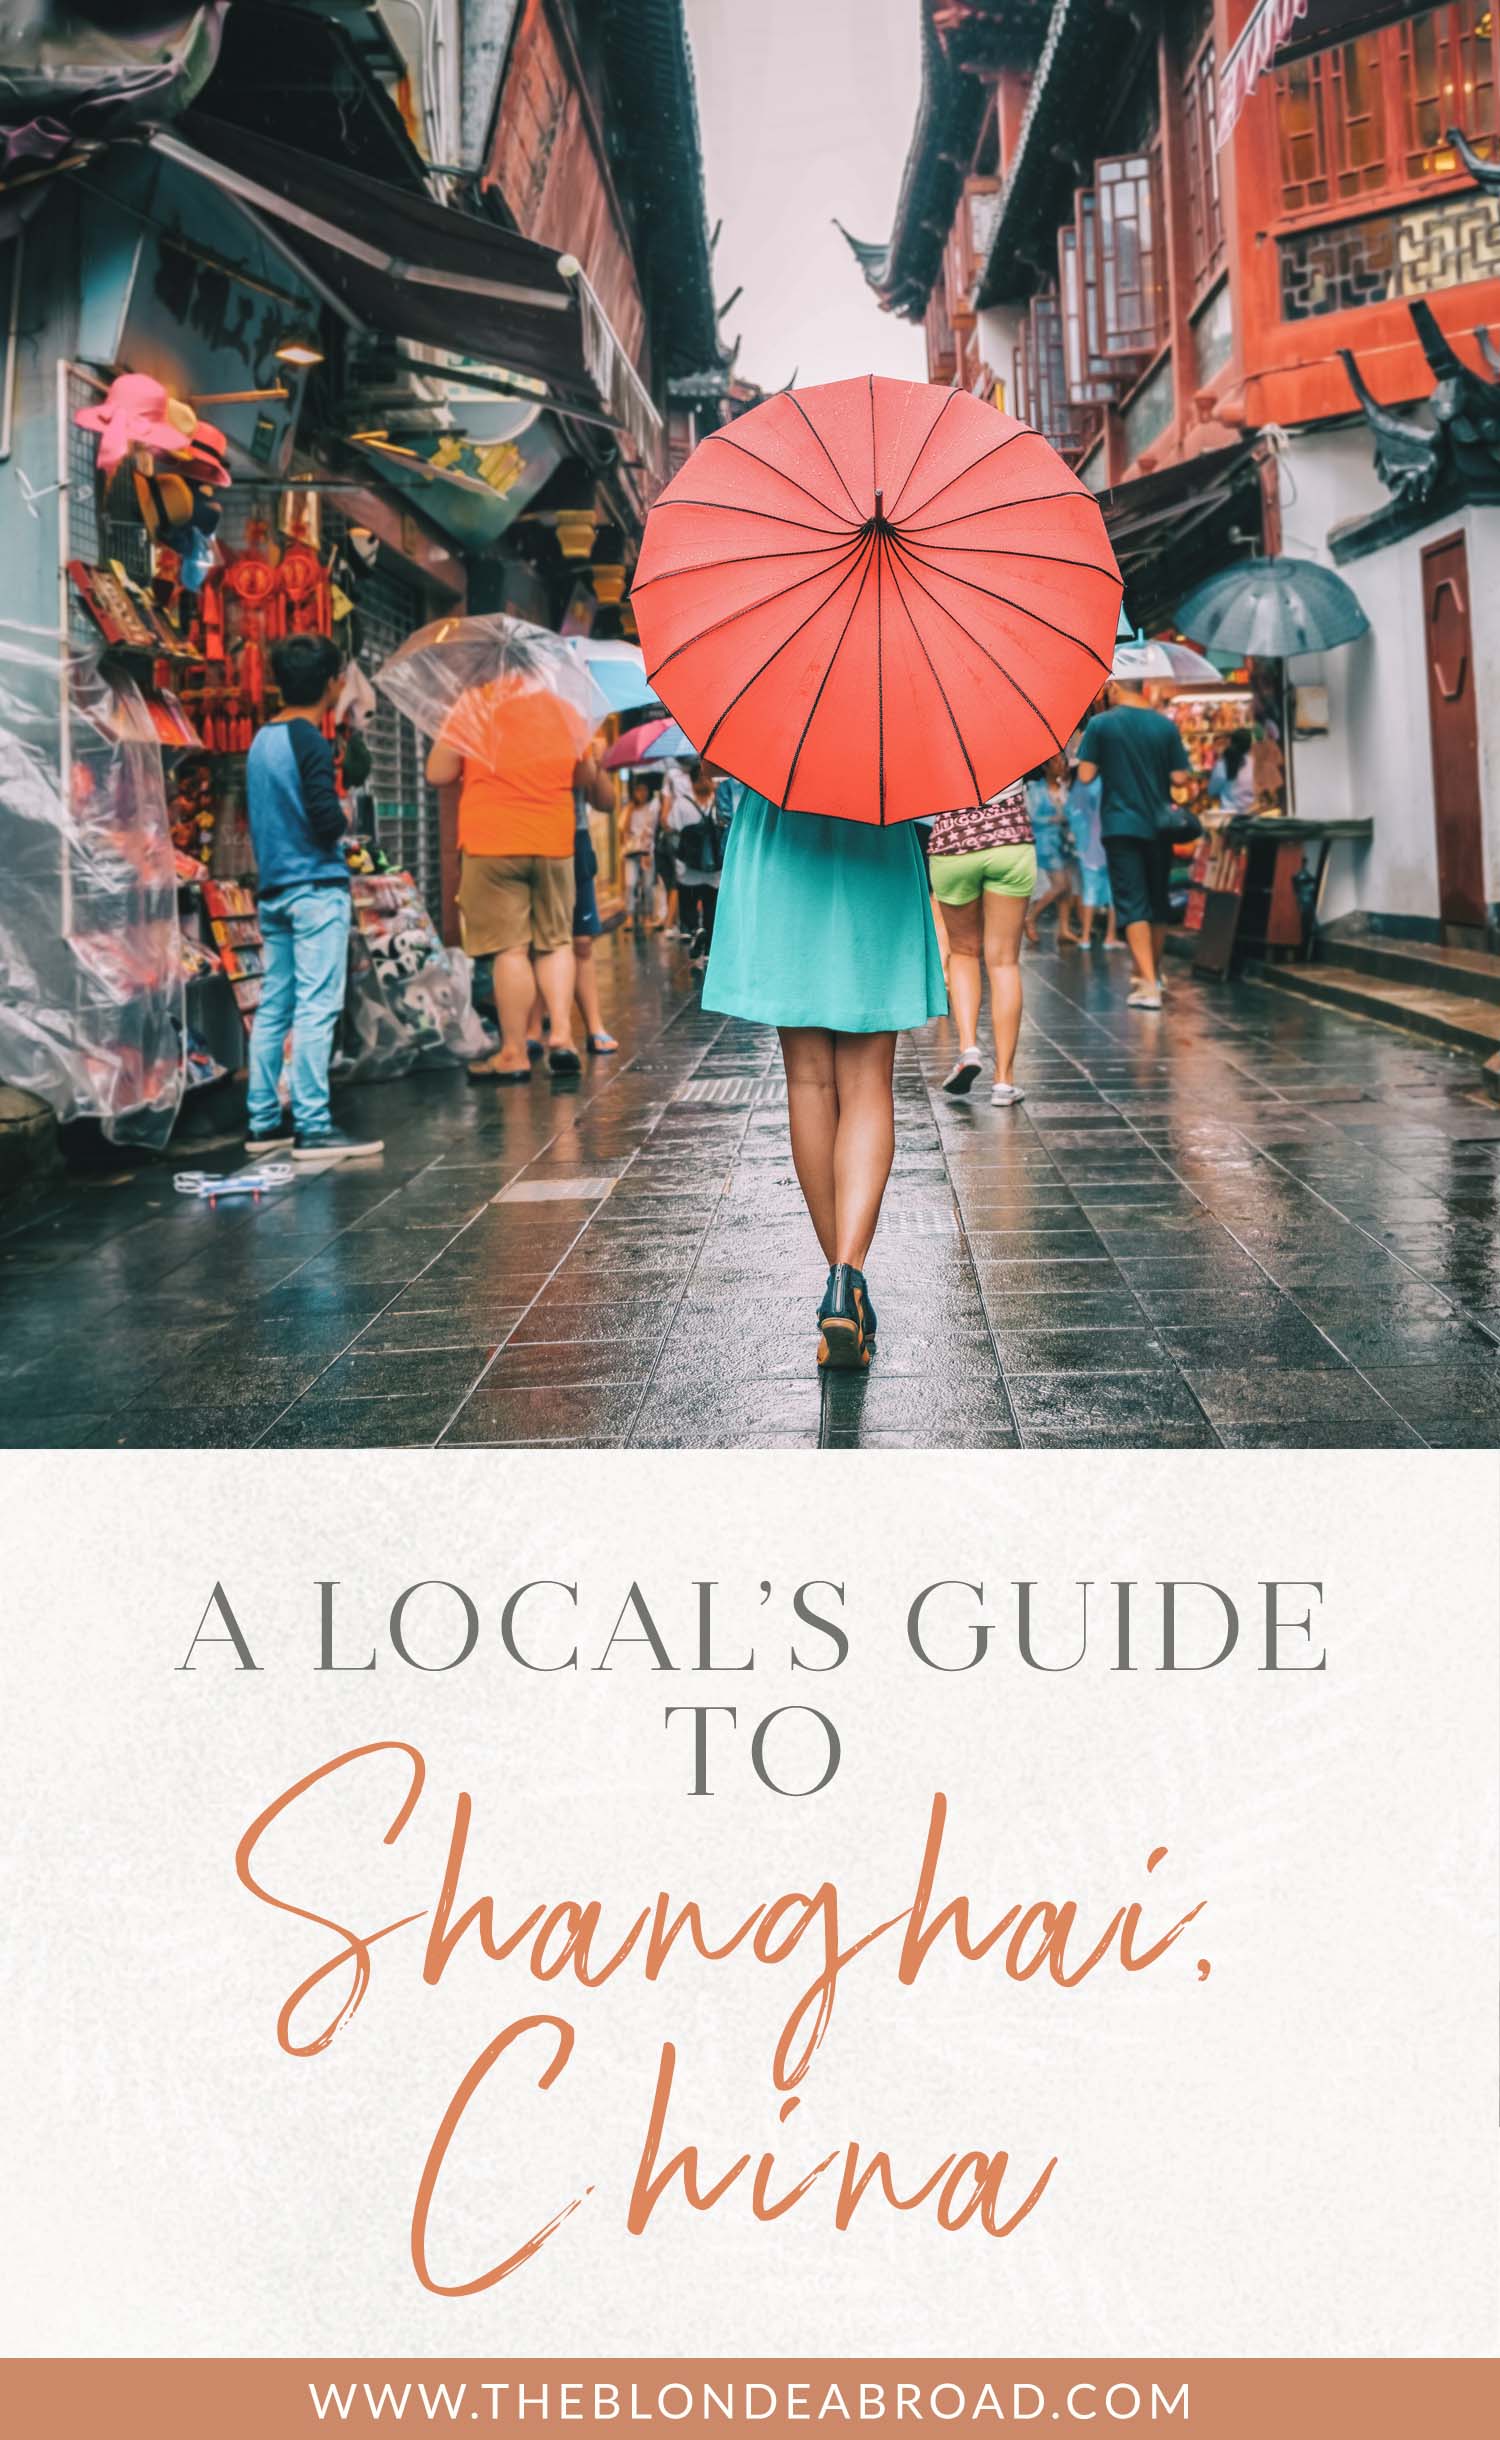 Local's Guide to Shanghai